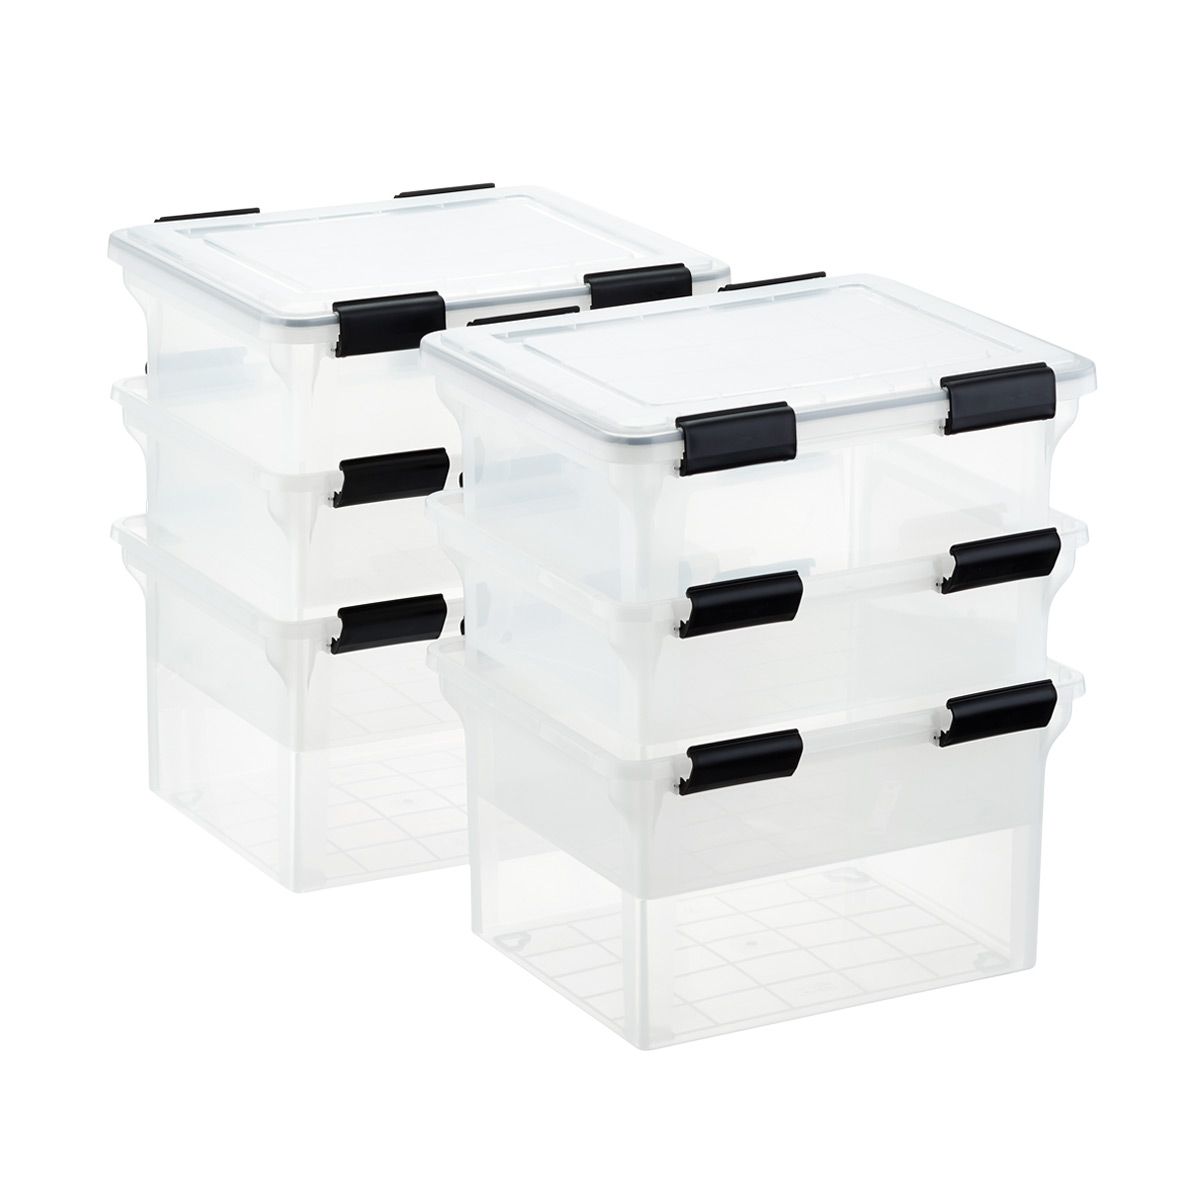 Case of 6 Weathertight File Boxes Translucent | The Container Store